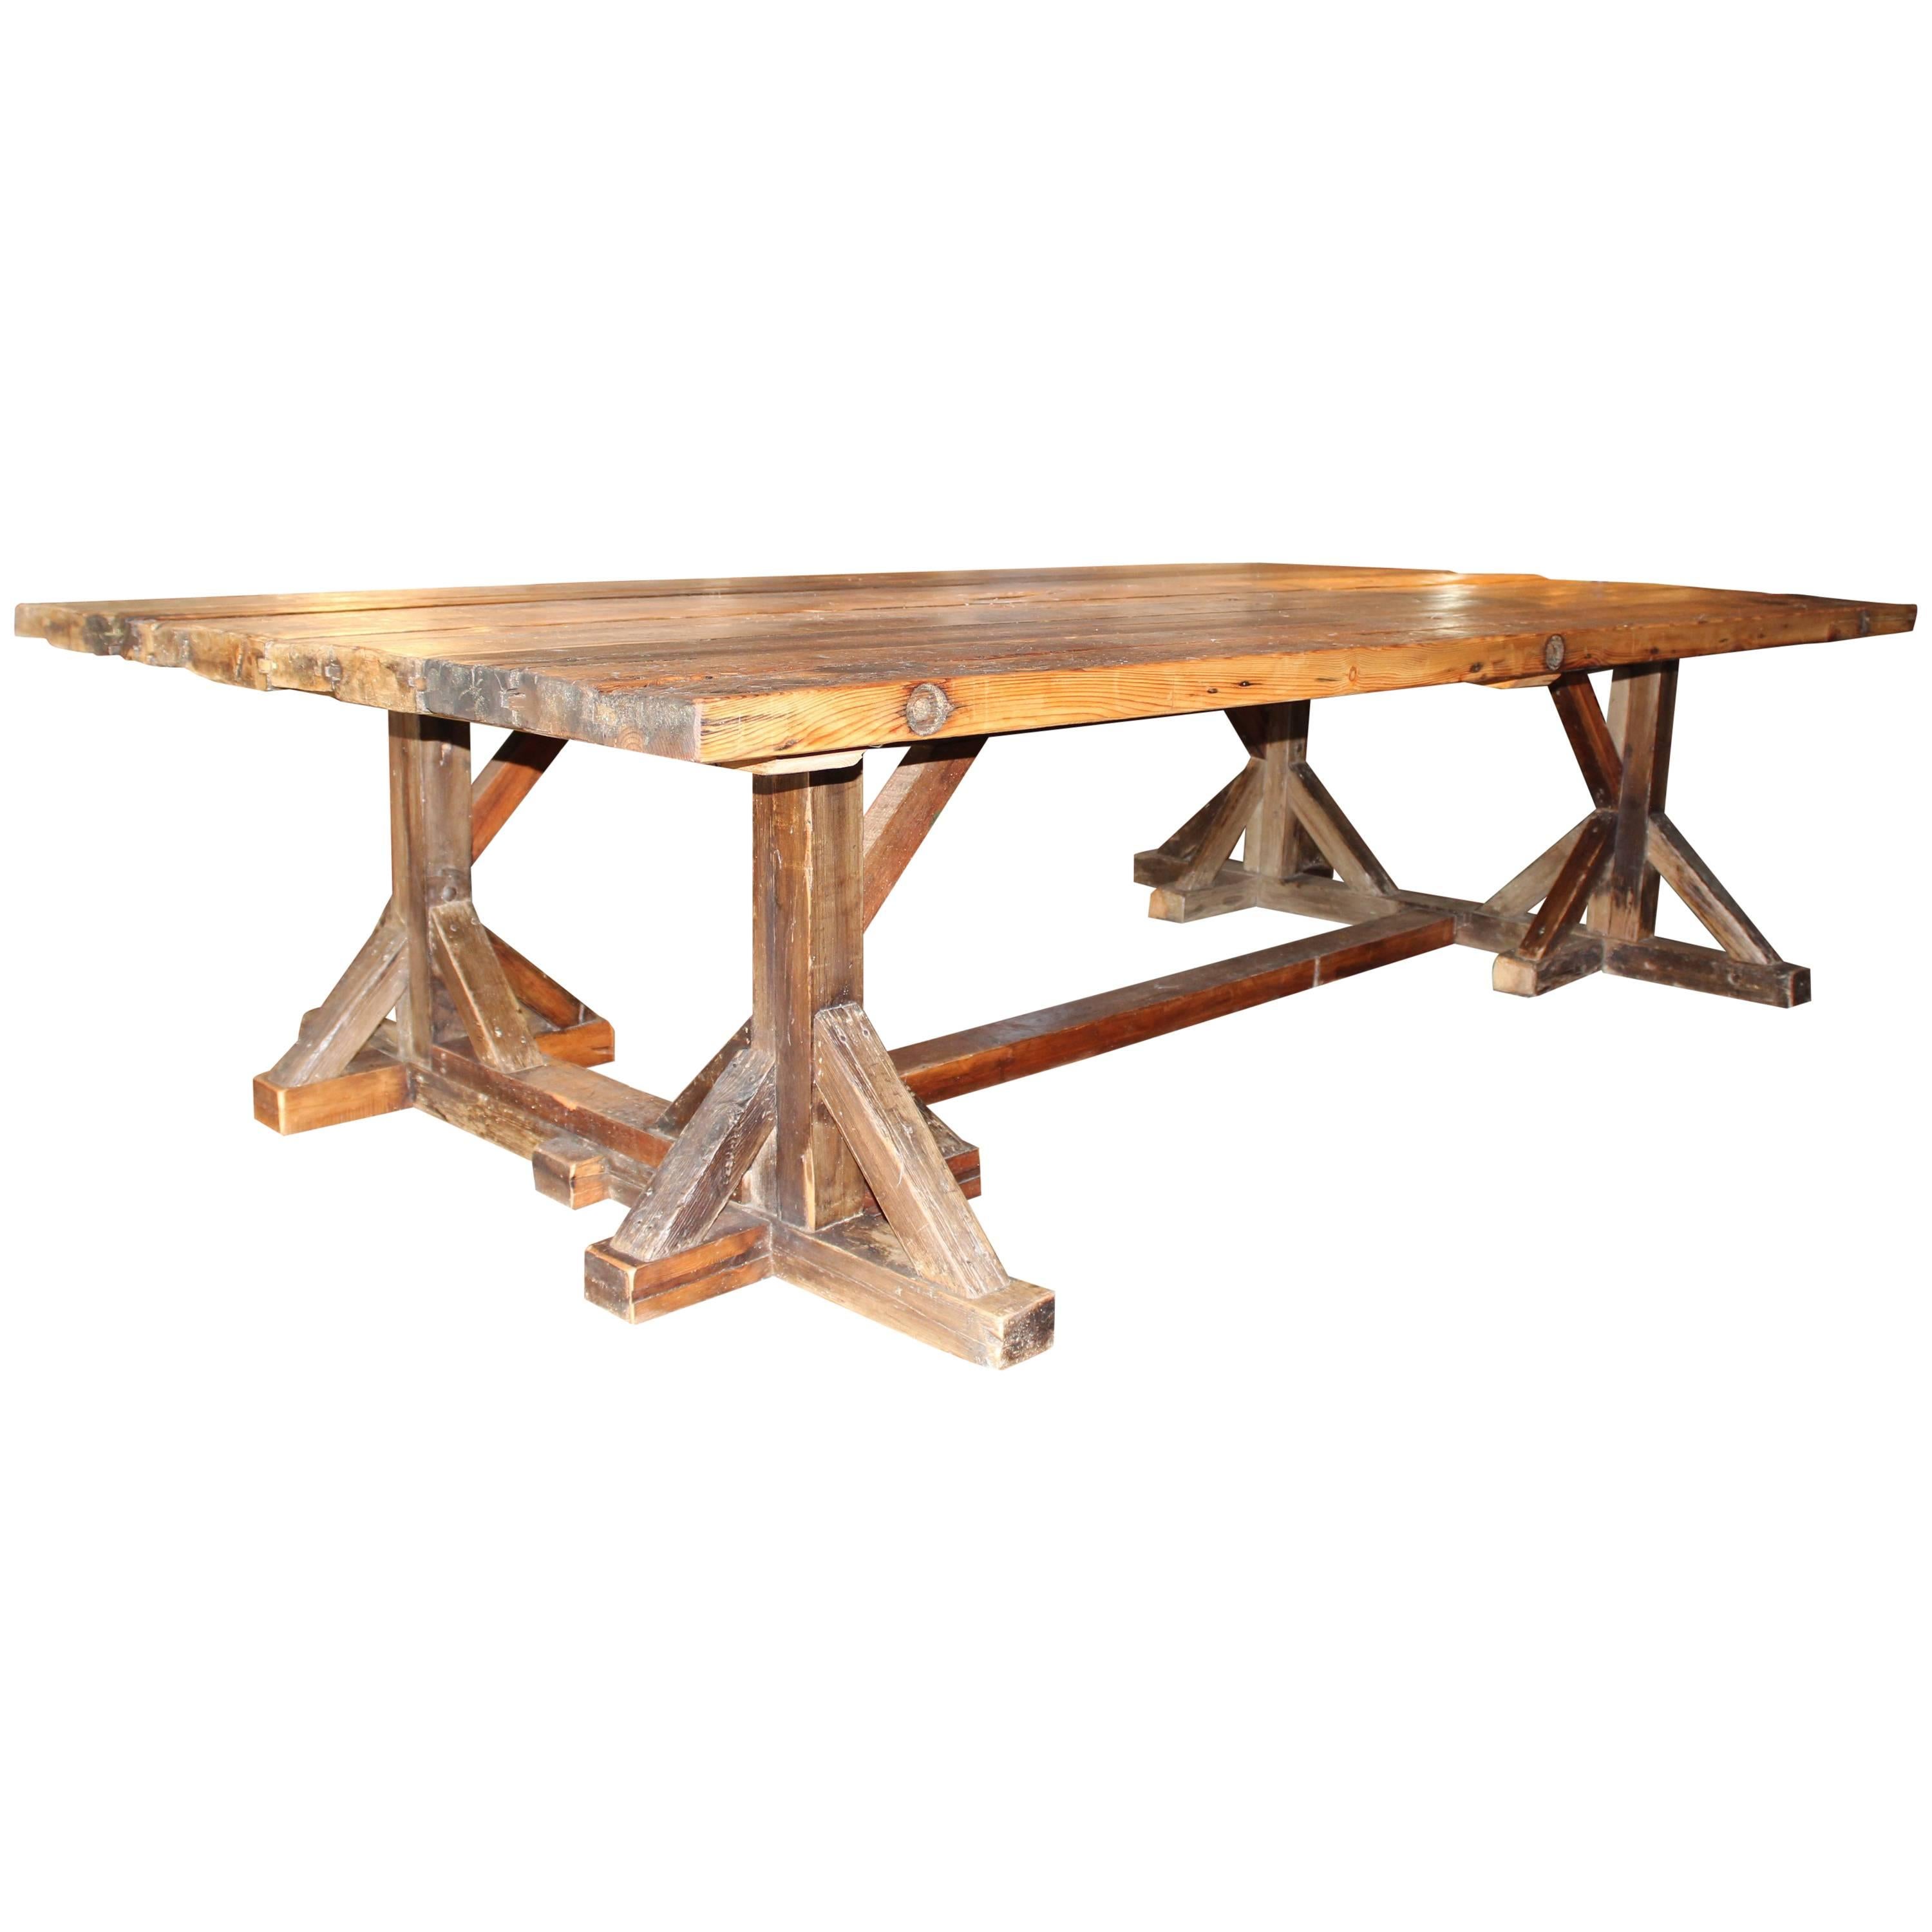 Oversize French Antique Style Shop Table on Architectural Base, Pine